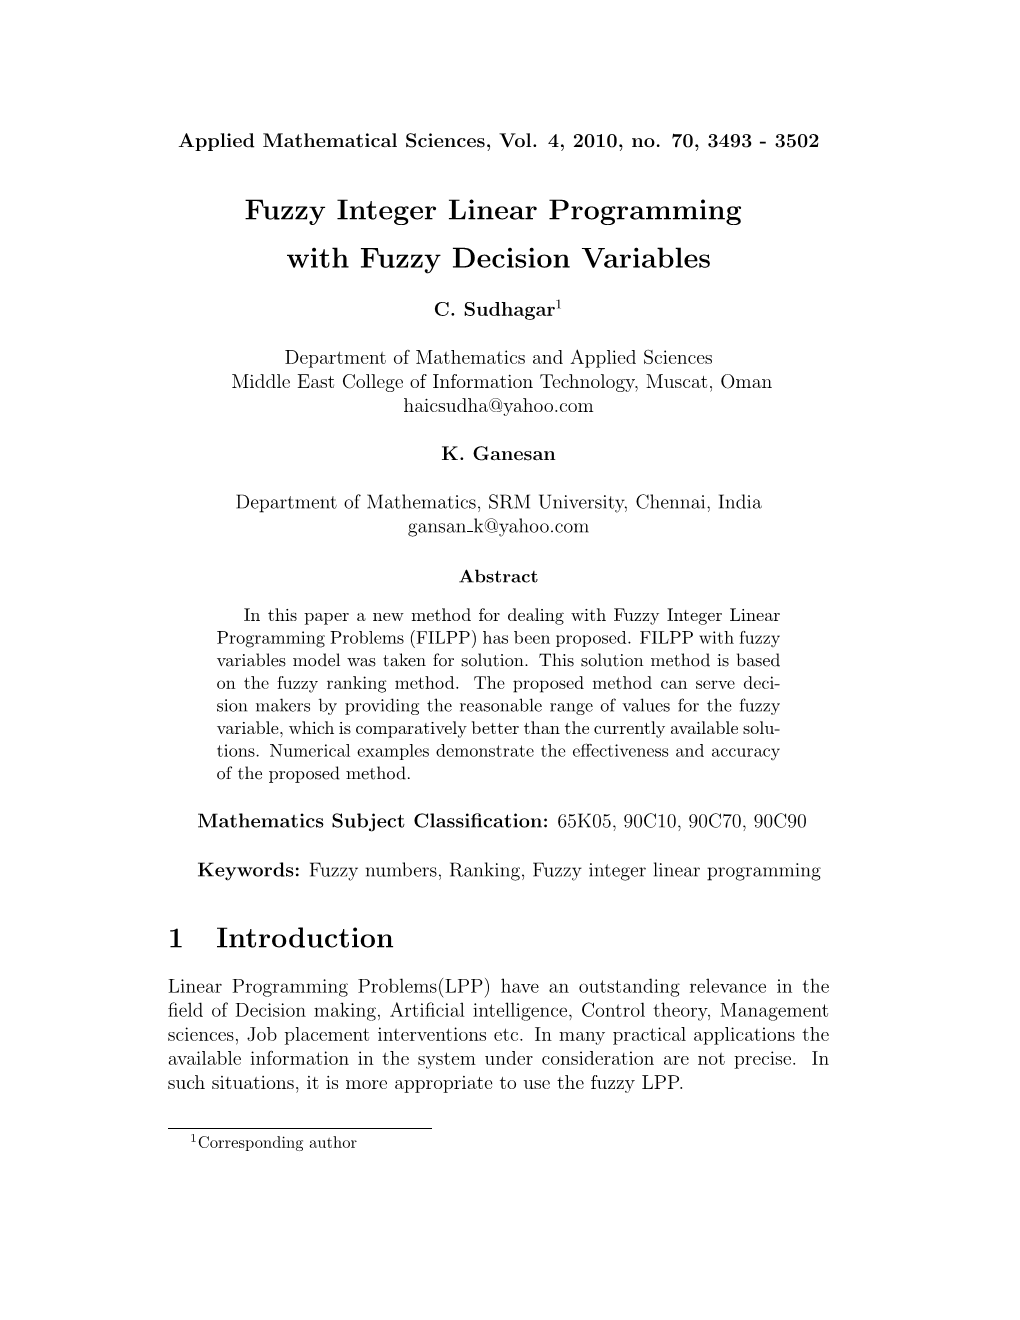 Fuzzy Integer Linear Programming with Fuzzy Decision Variables